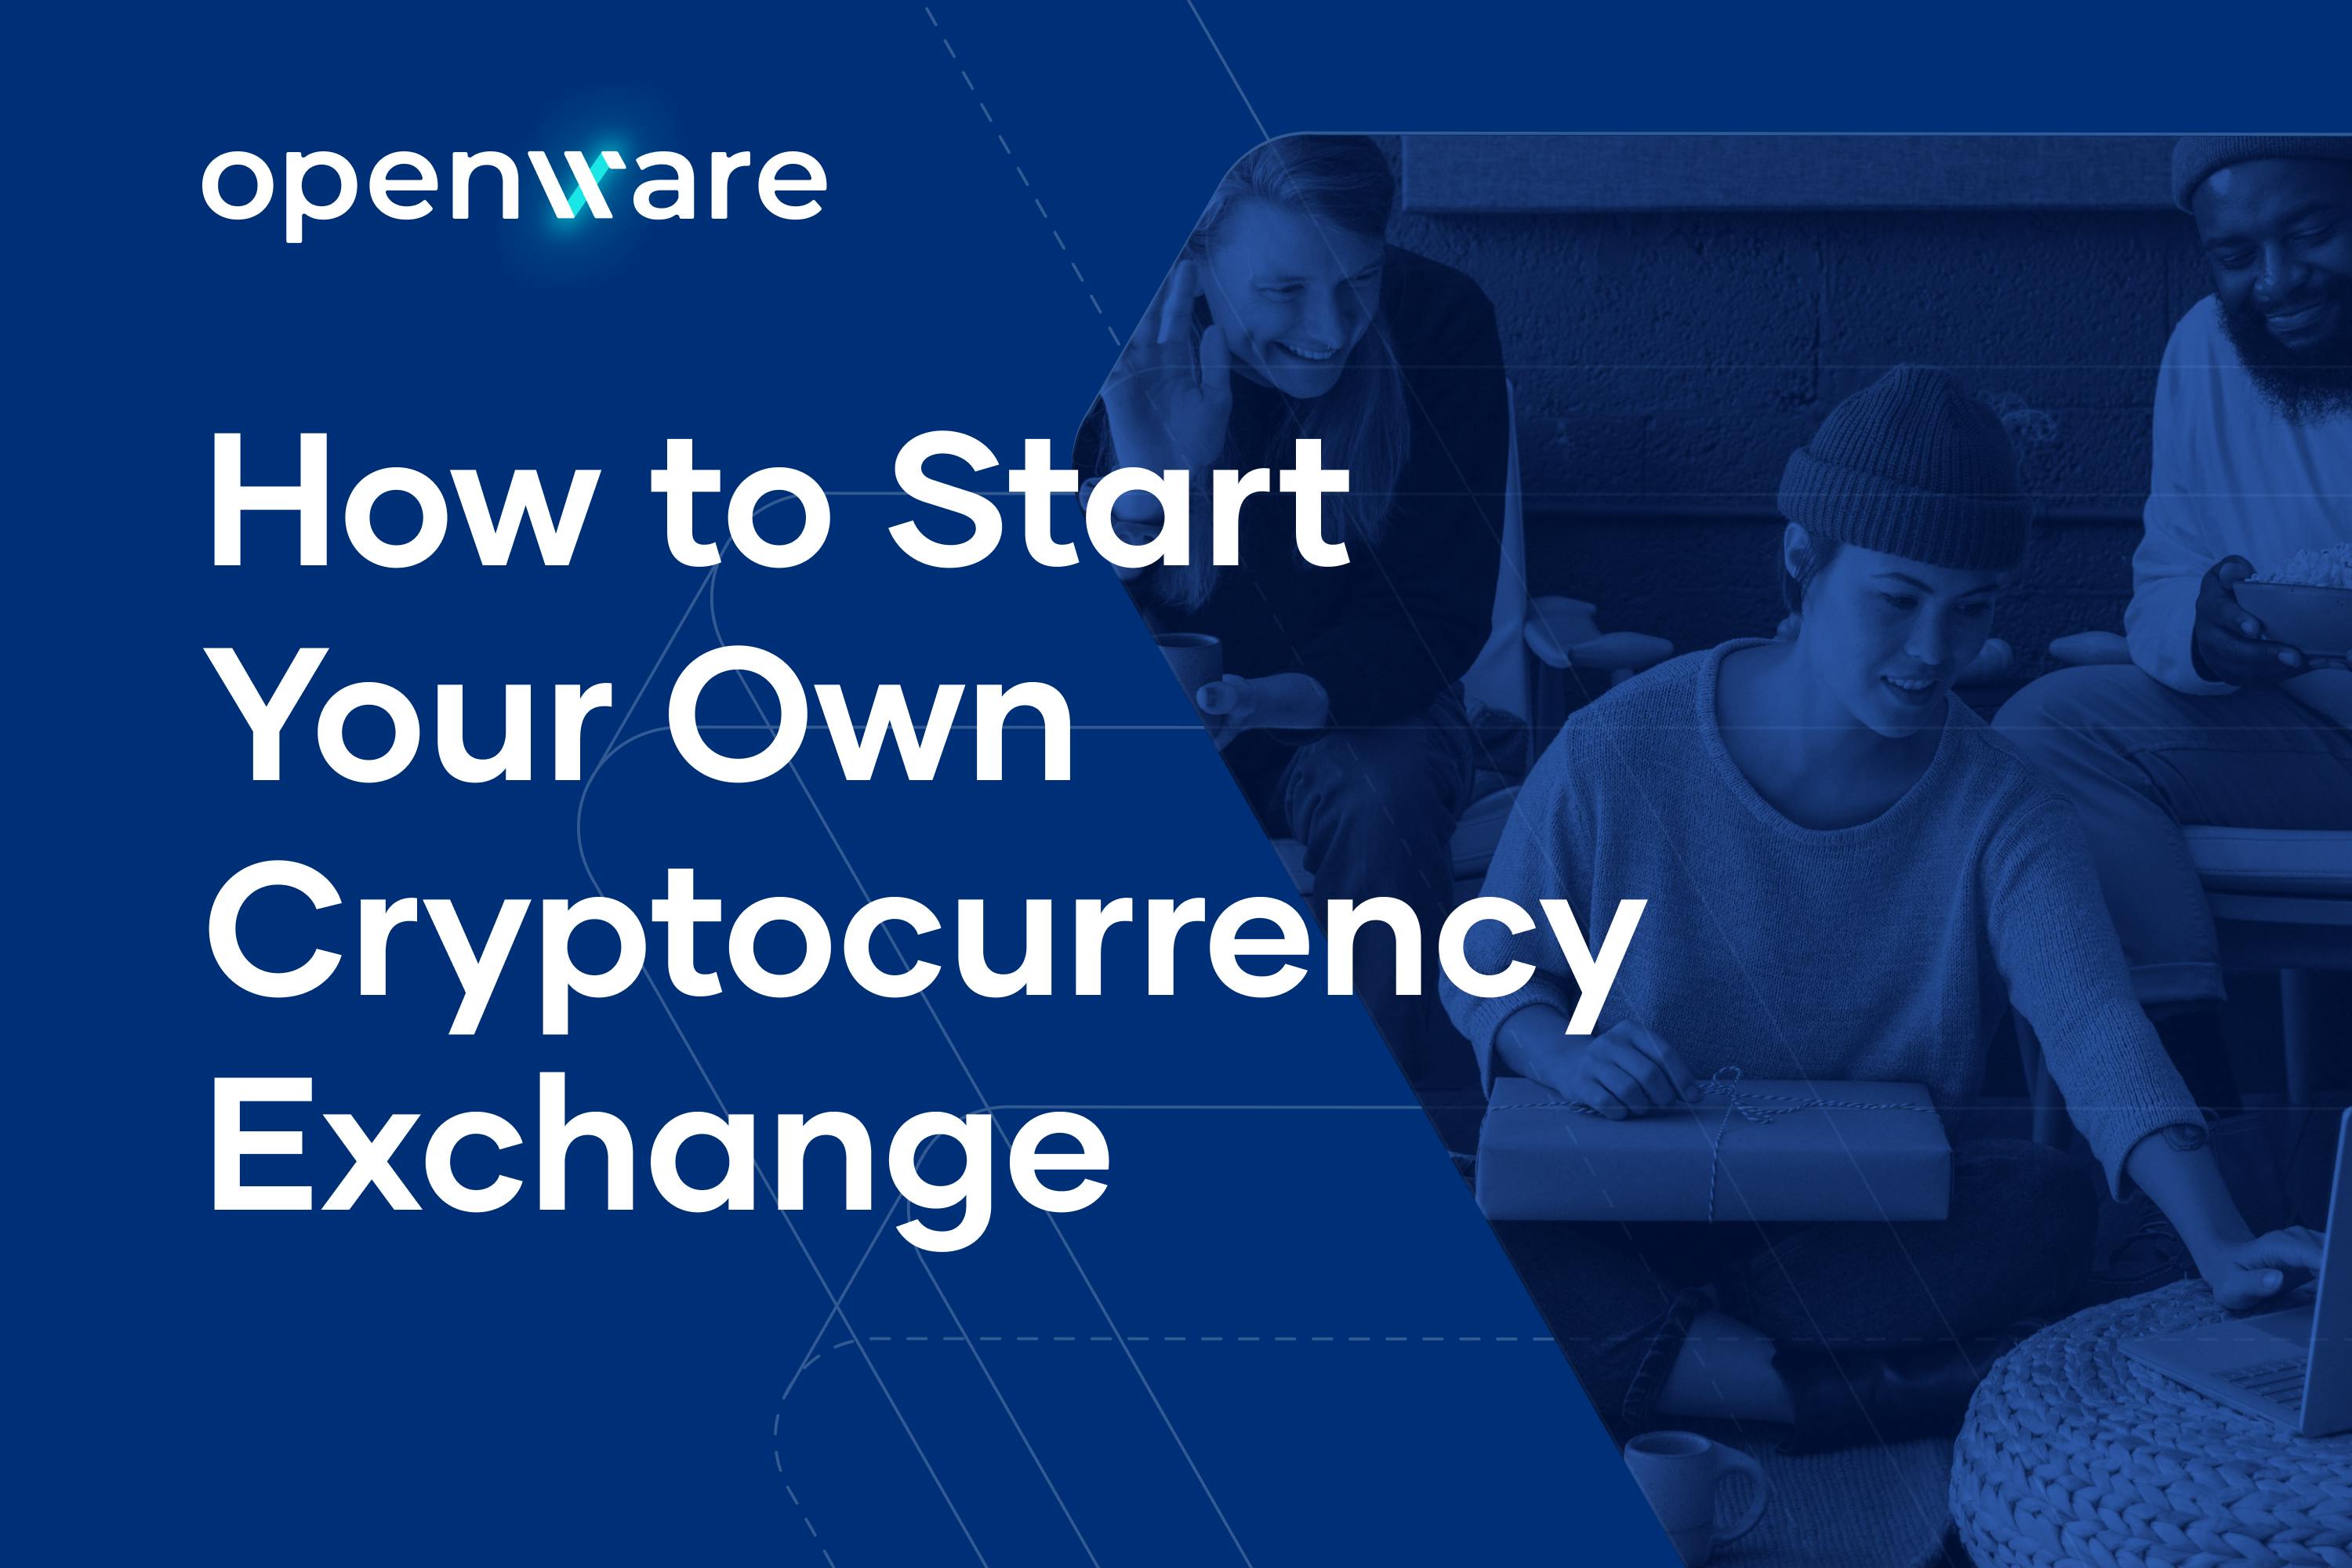 Banner Image showing the words "How to Start Your Own Cryptocurrency Exchange"